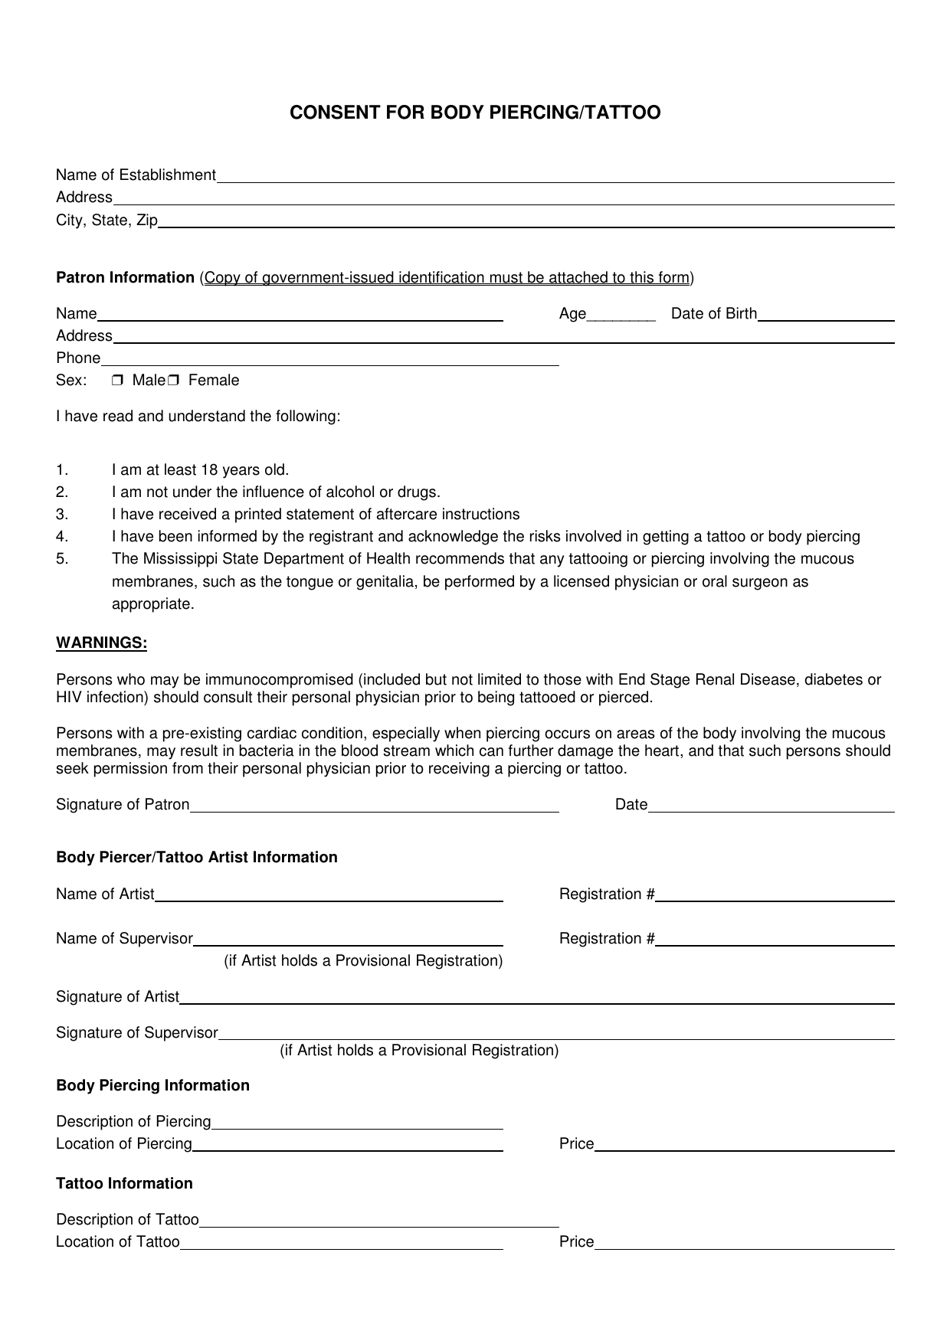 Consent for Body Piercing / Tattoo - Mississippi, Page 1